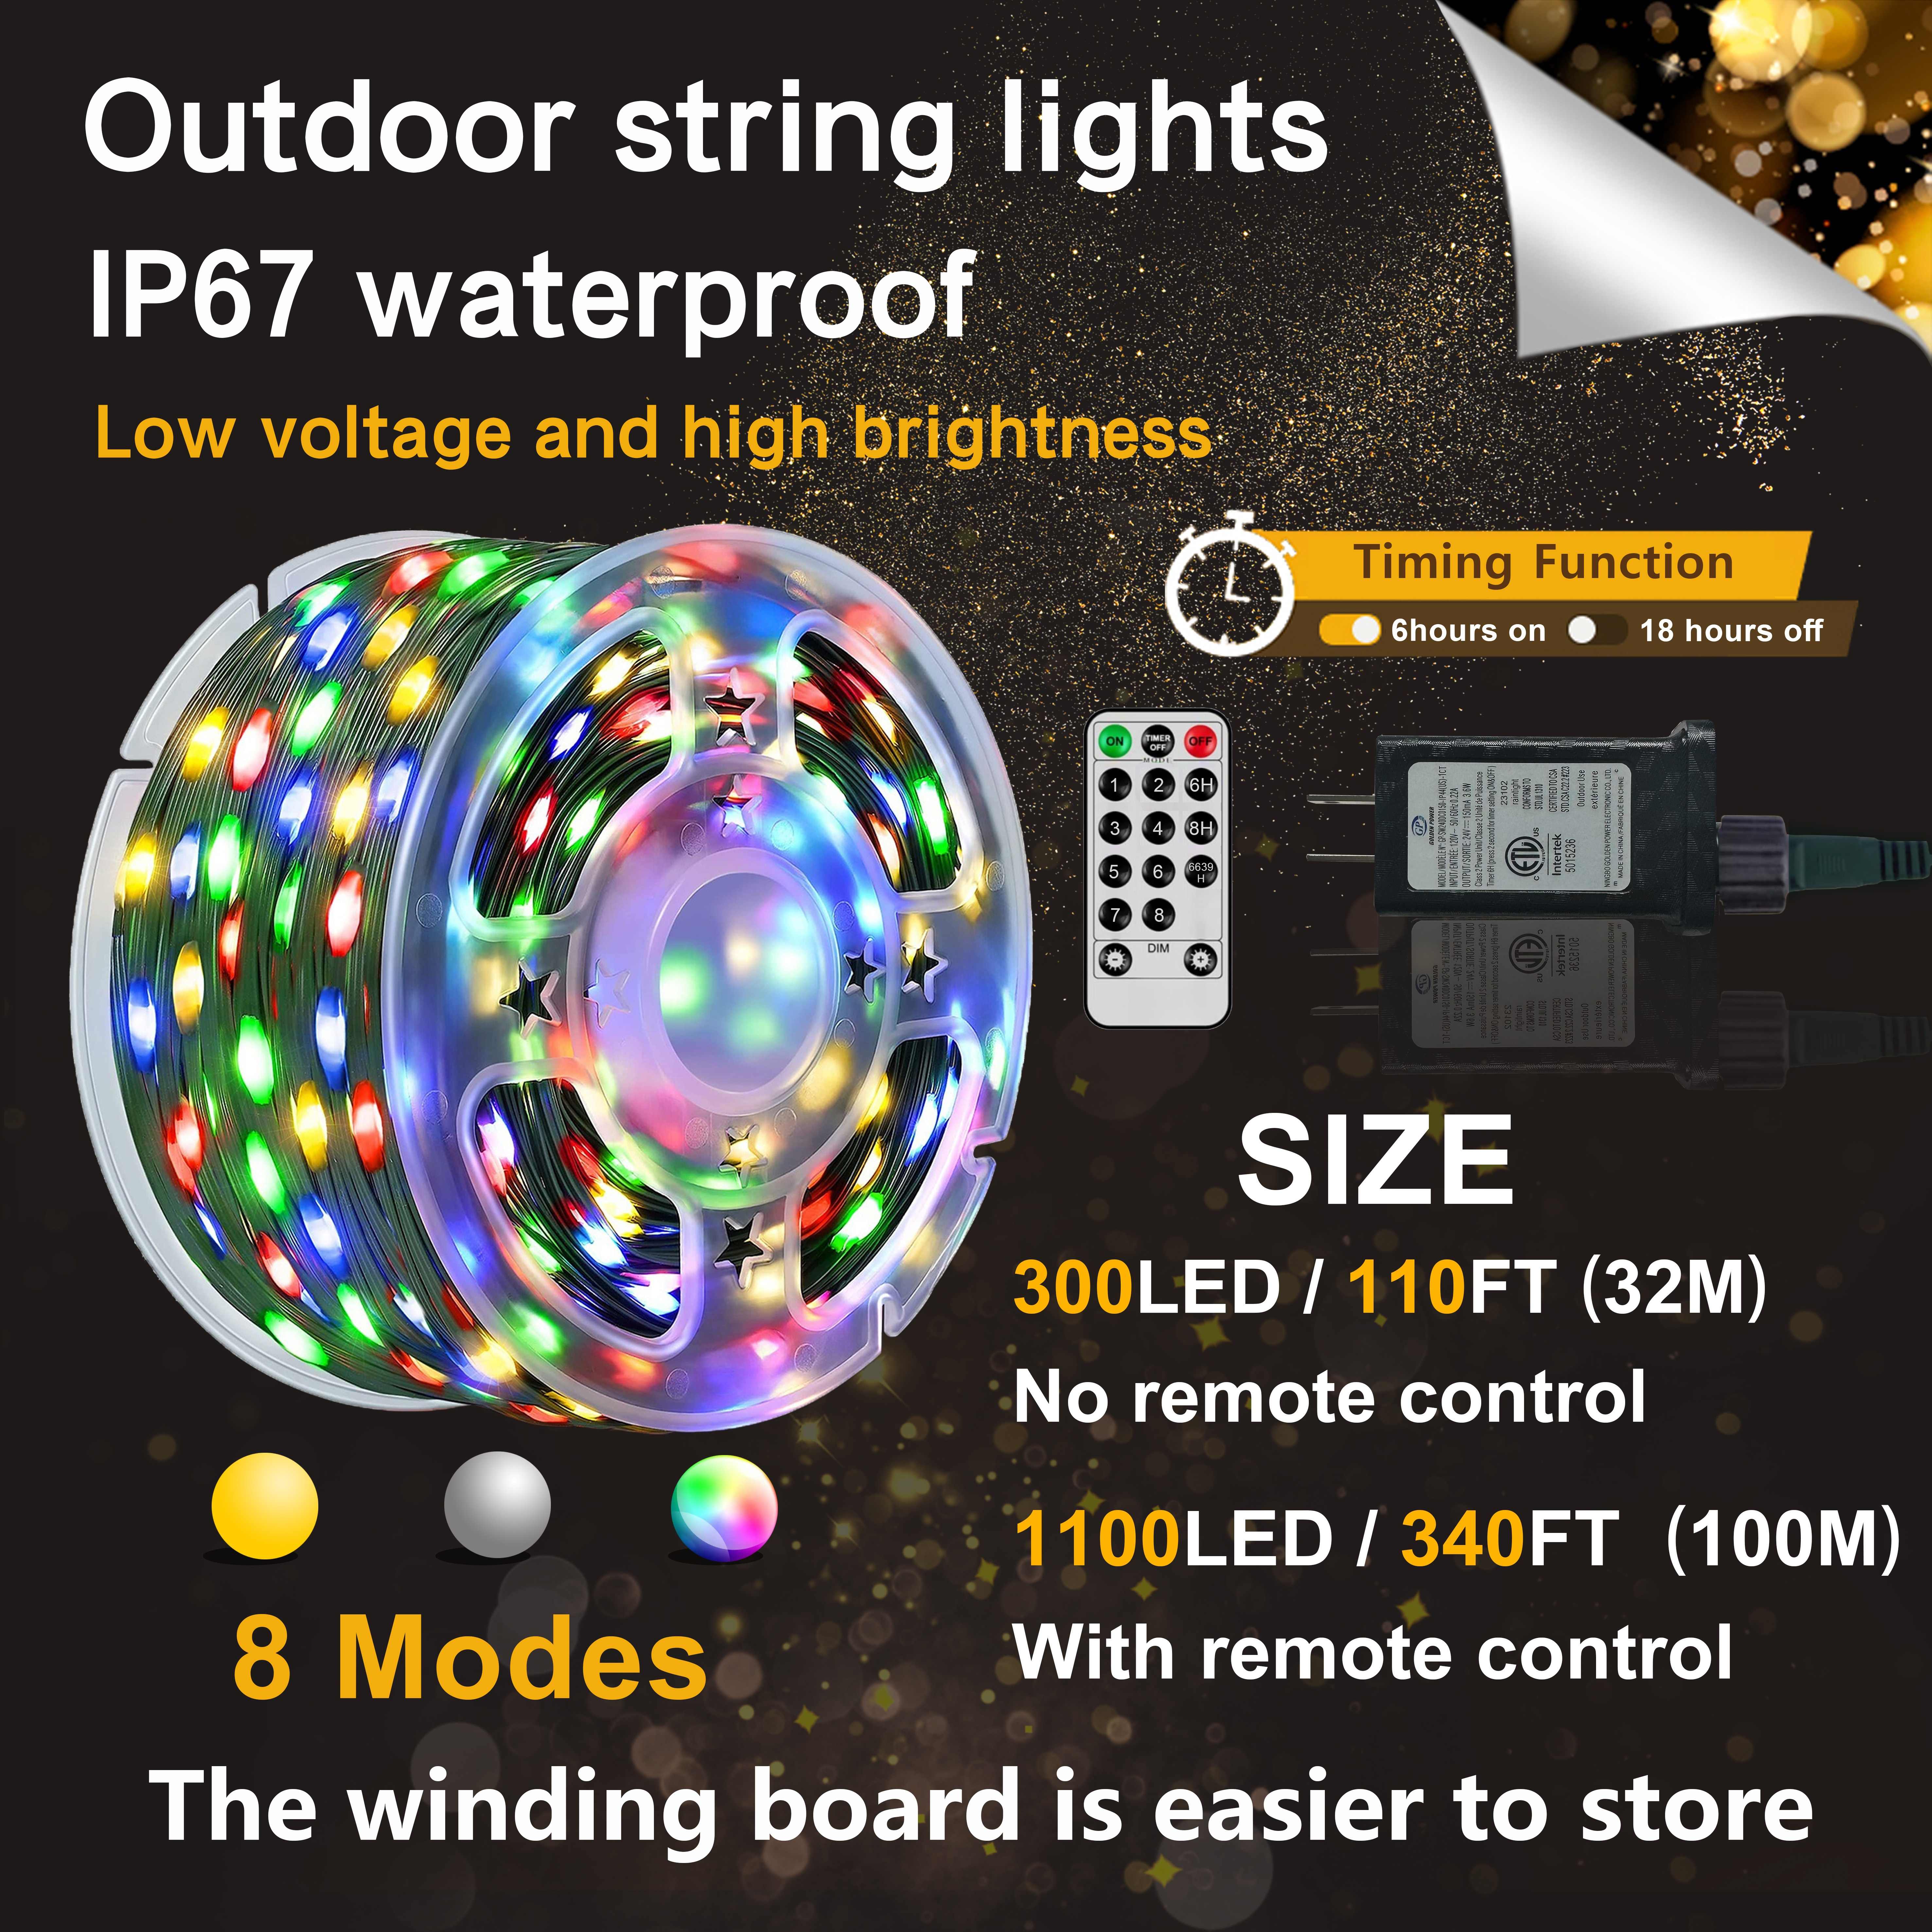 340 Feet 1000 LED Garden String Lights, Outdoor Waterproof Christmas Tree Lights, With 8 Modes Remote Timer, For Outdoor Indoor Christmas Decoration, Outdoor Multi-colored White Warm With Cable Tray, 7X12 Pure Copper Wire Color Box Packaging details 2